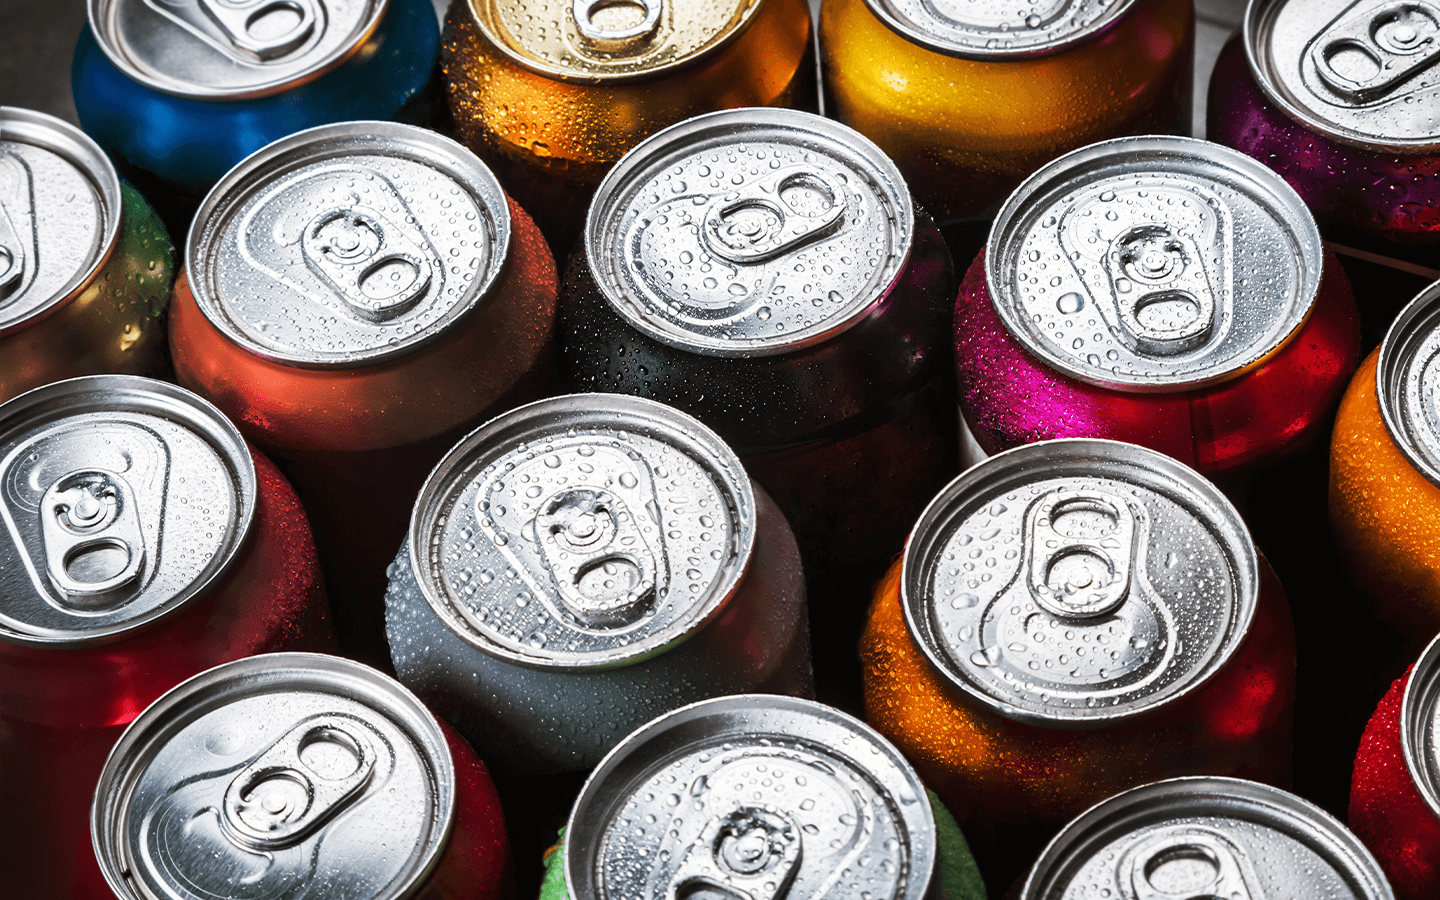 How Much Is Too Much? Our Race Against Energy Drinks